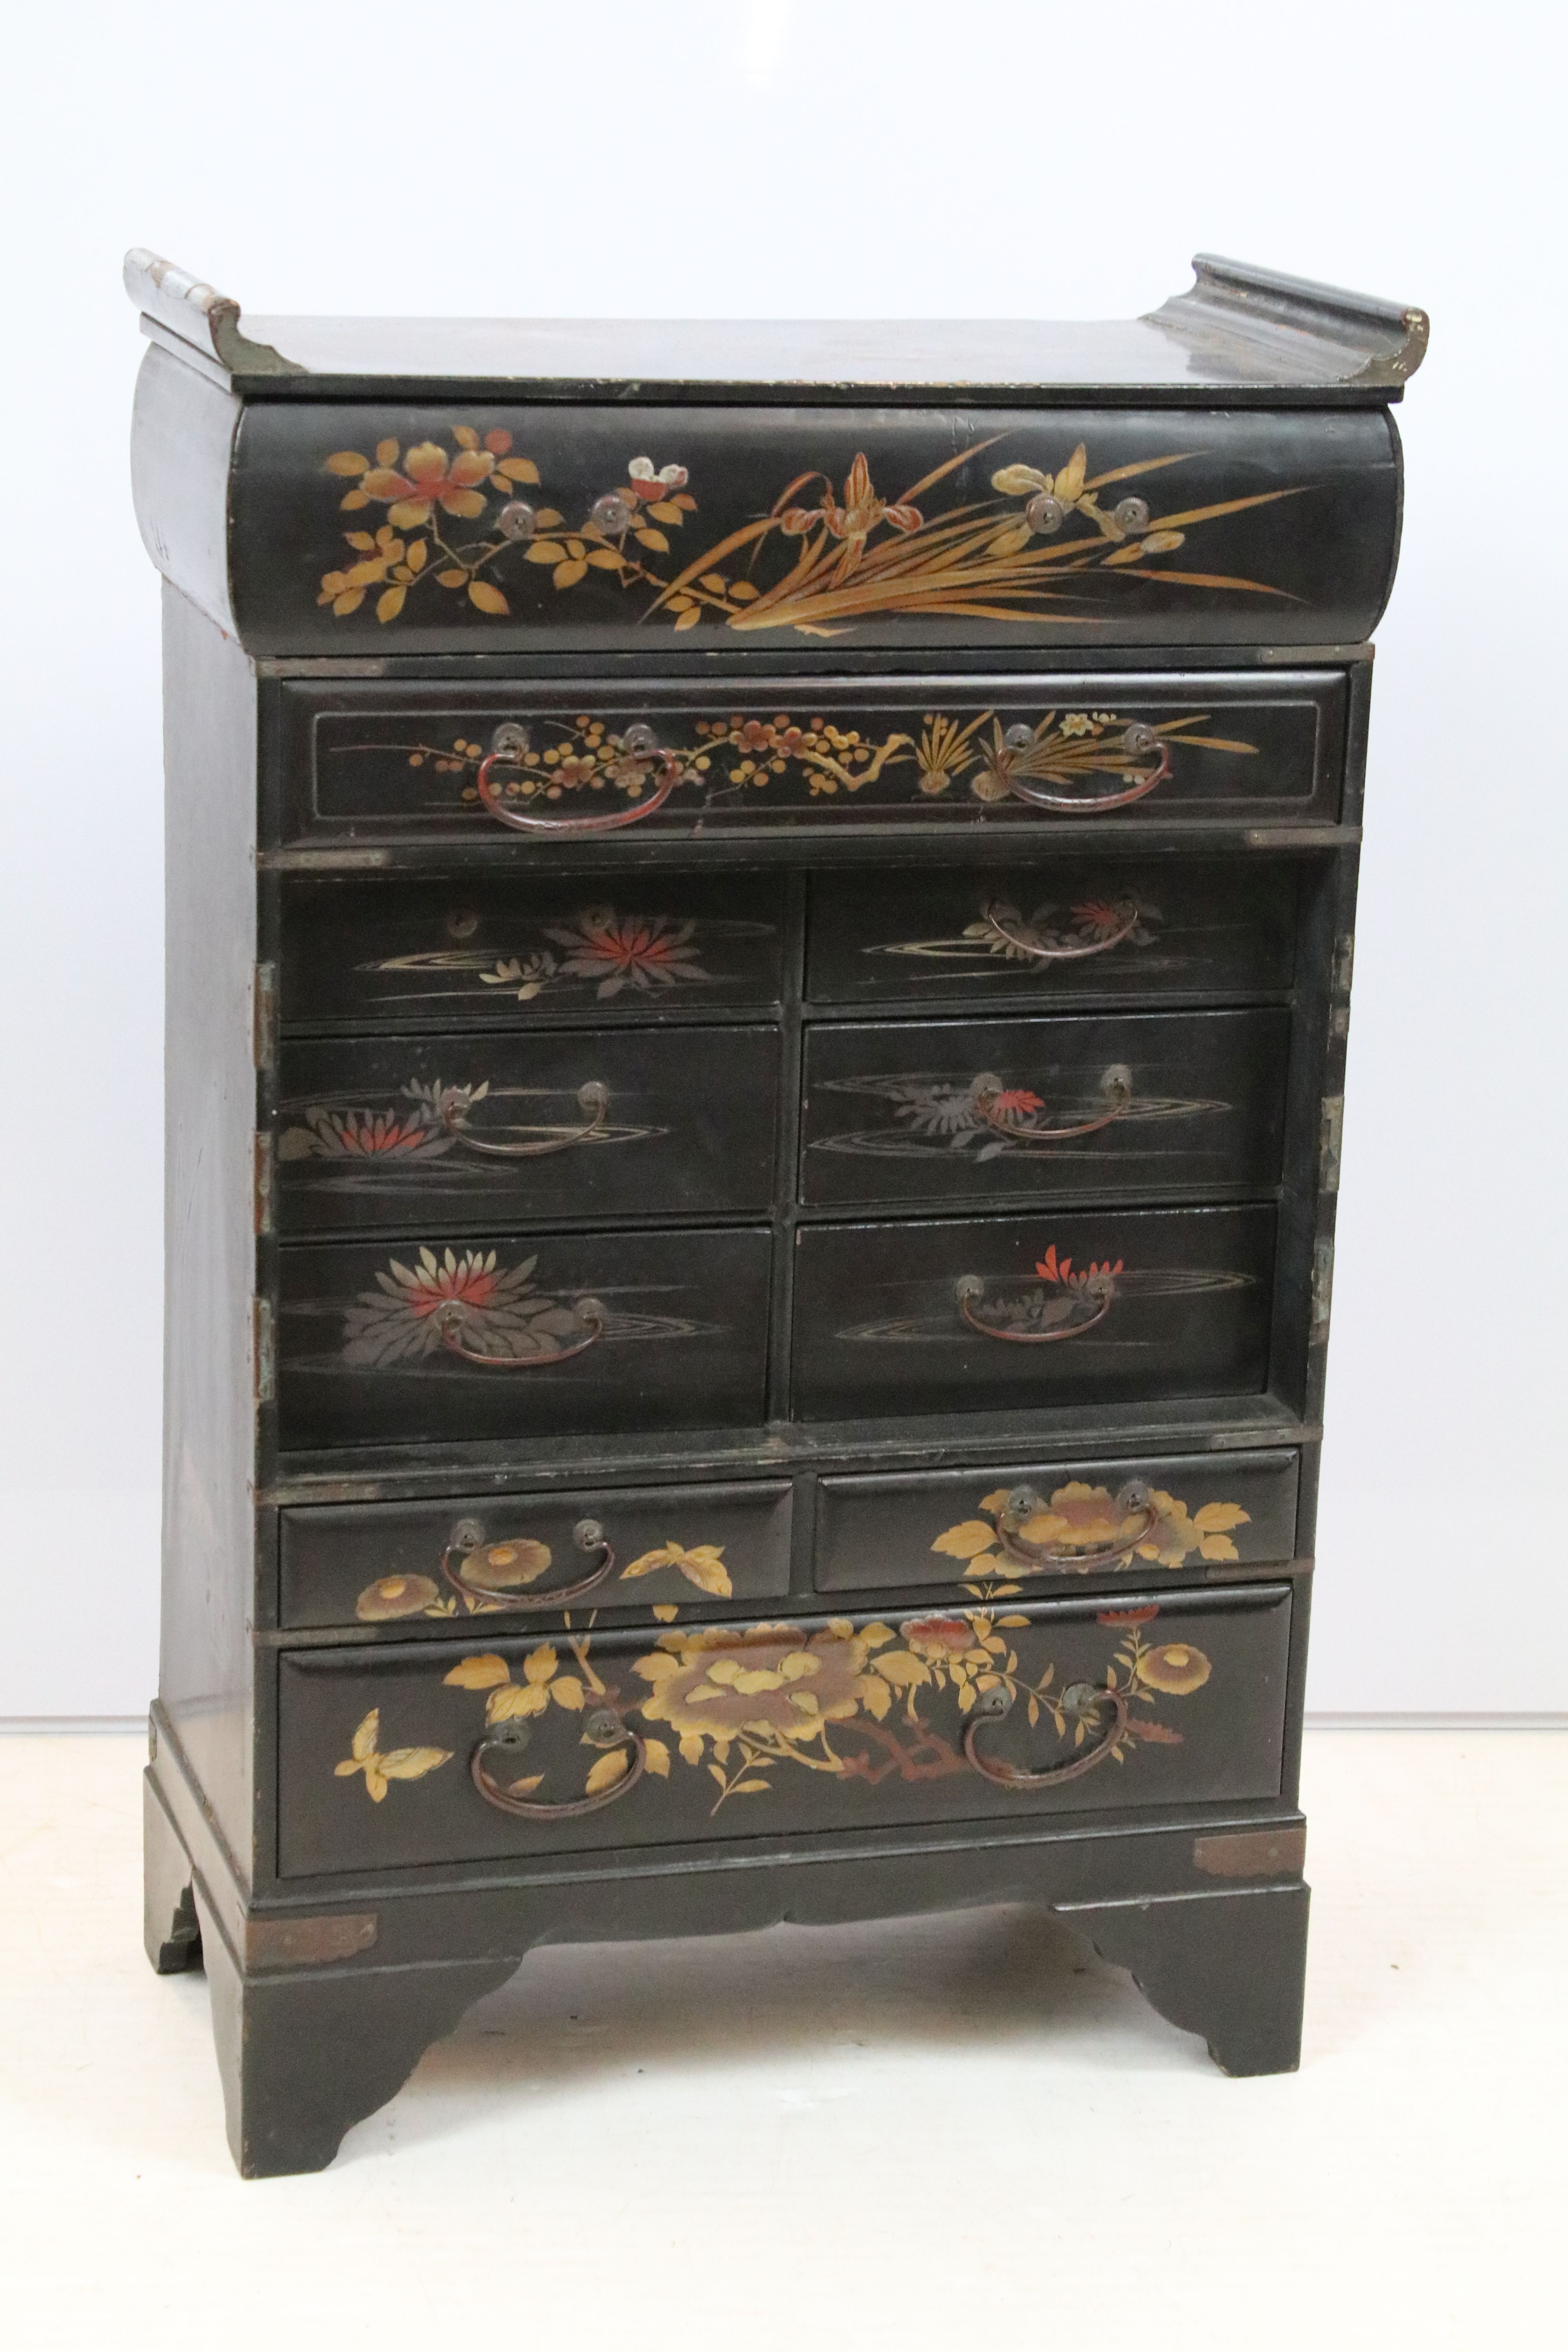 Oriental lacquered cabinet, the japanned surface painted with flowers and branches, with an